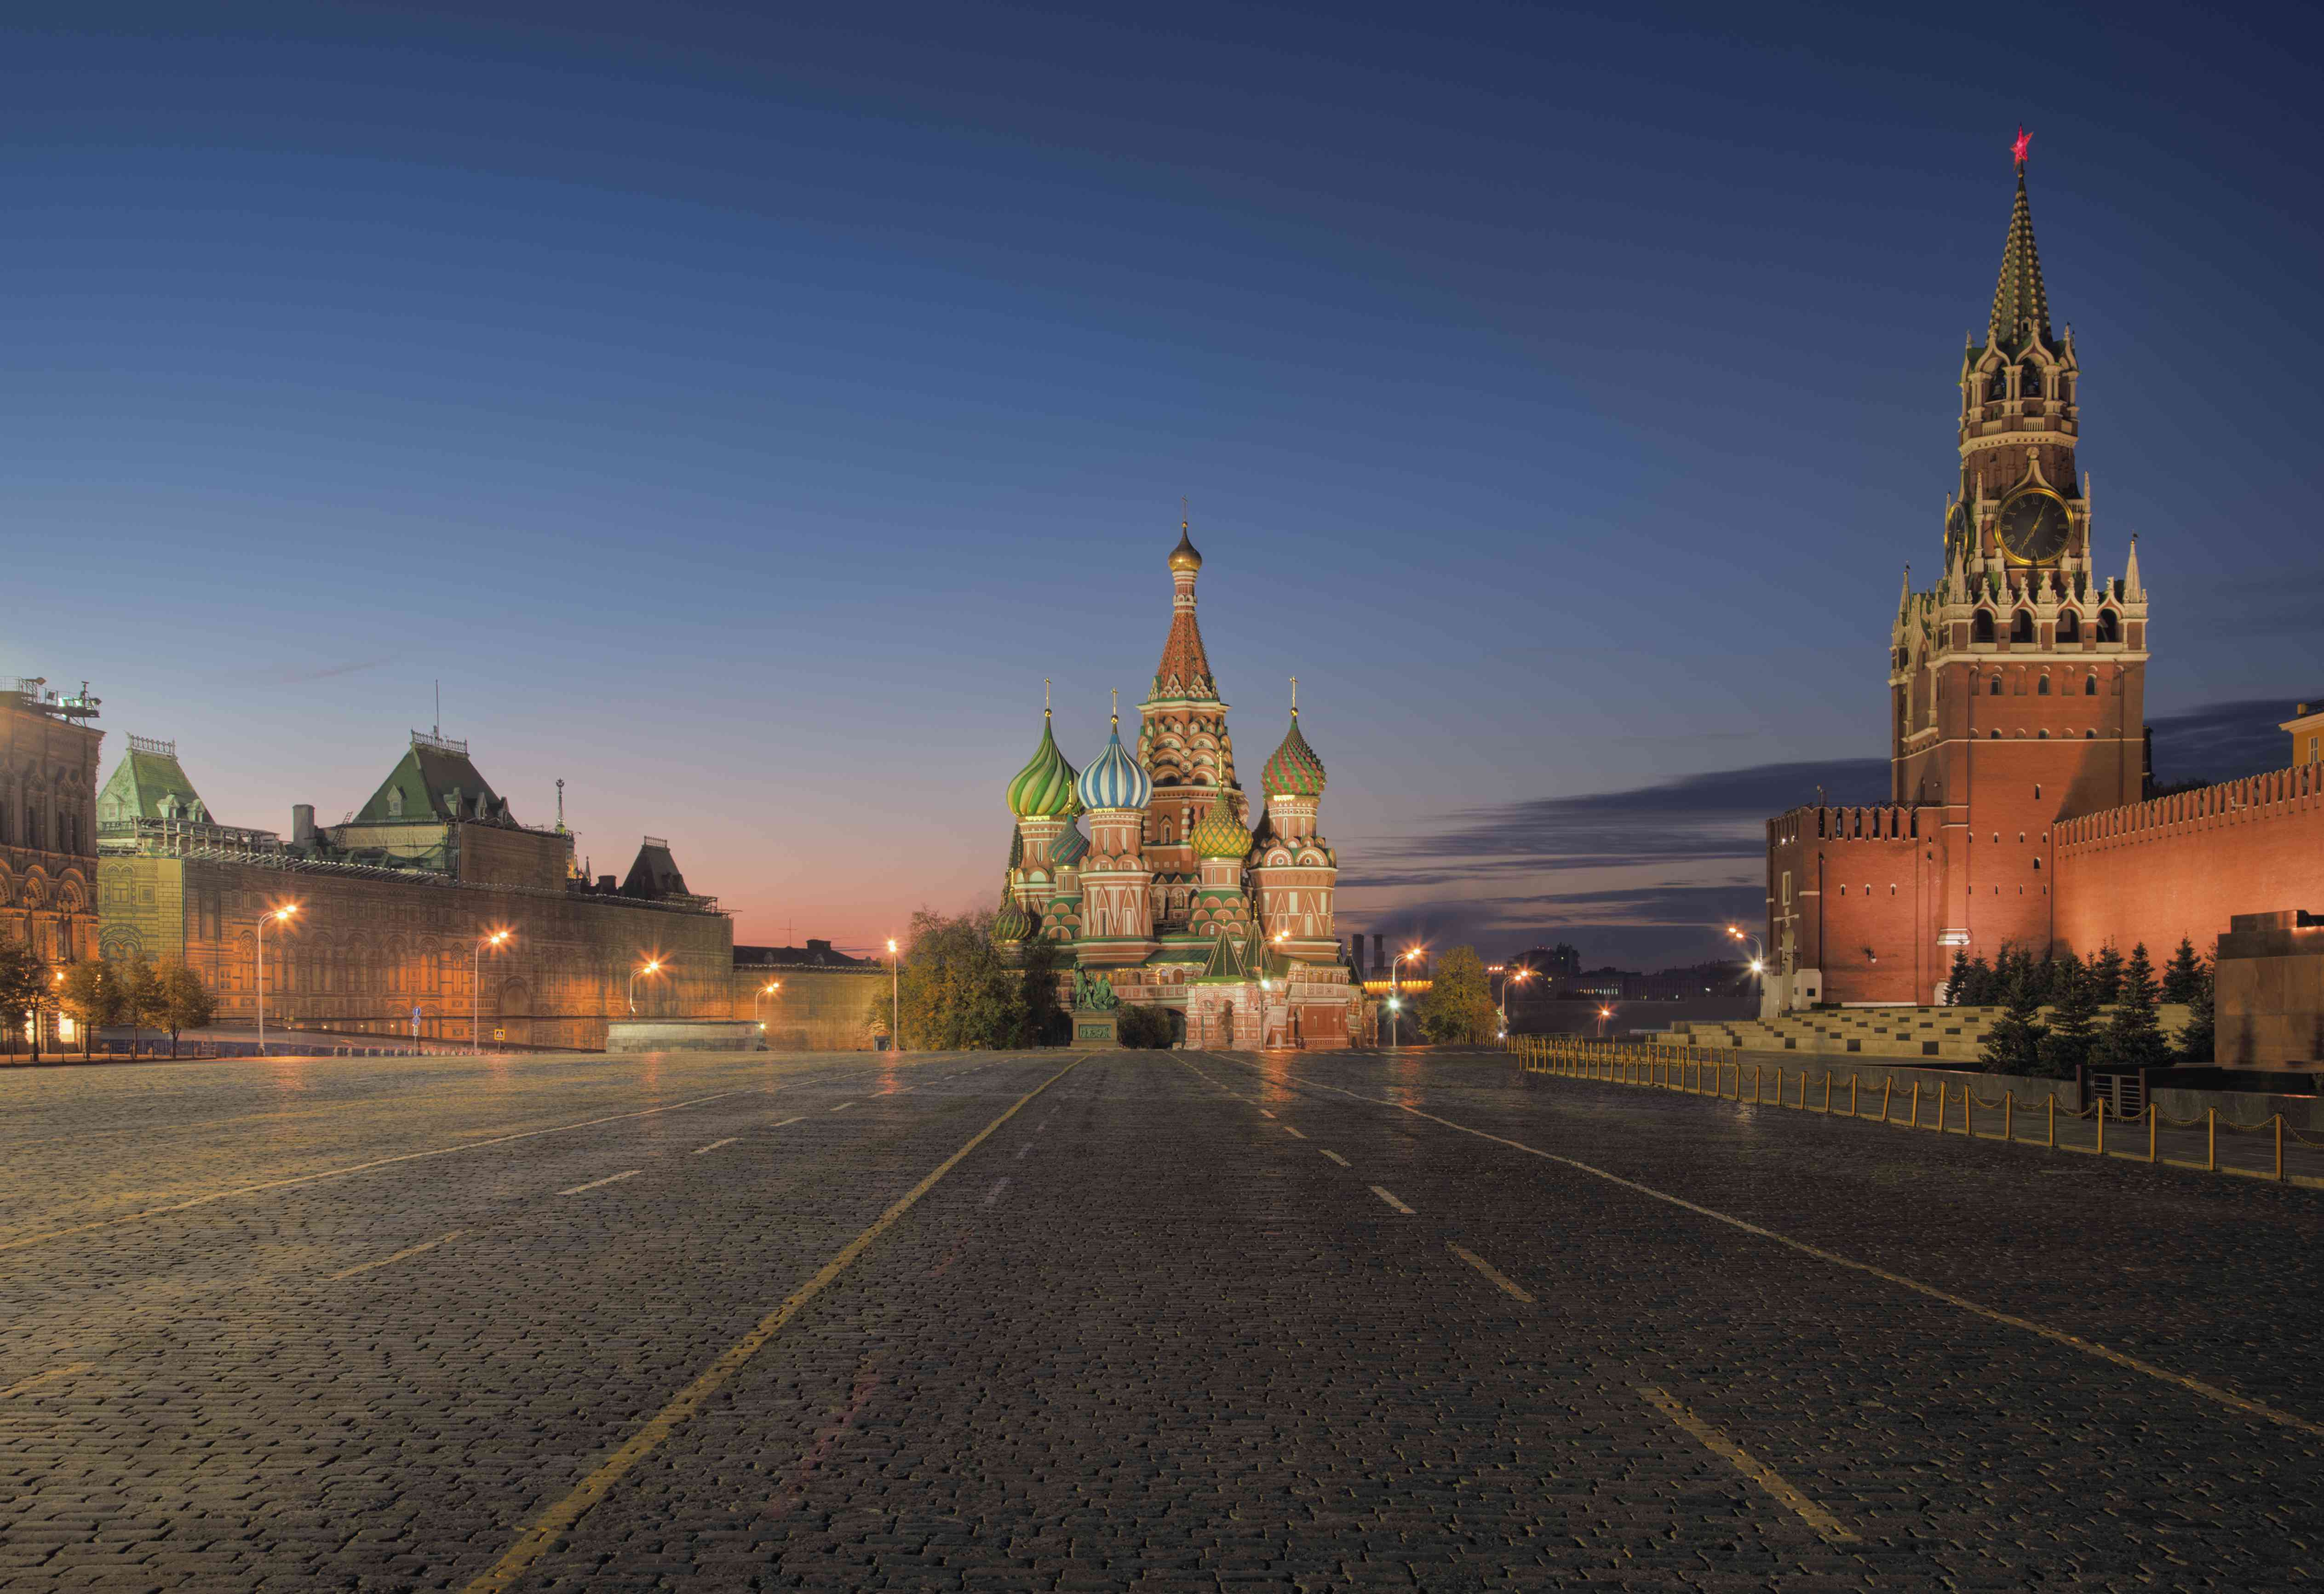 Kremlin, Saint Basil's Cathedral, and Red Square, Moscow, Russia